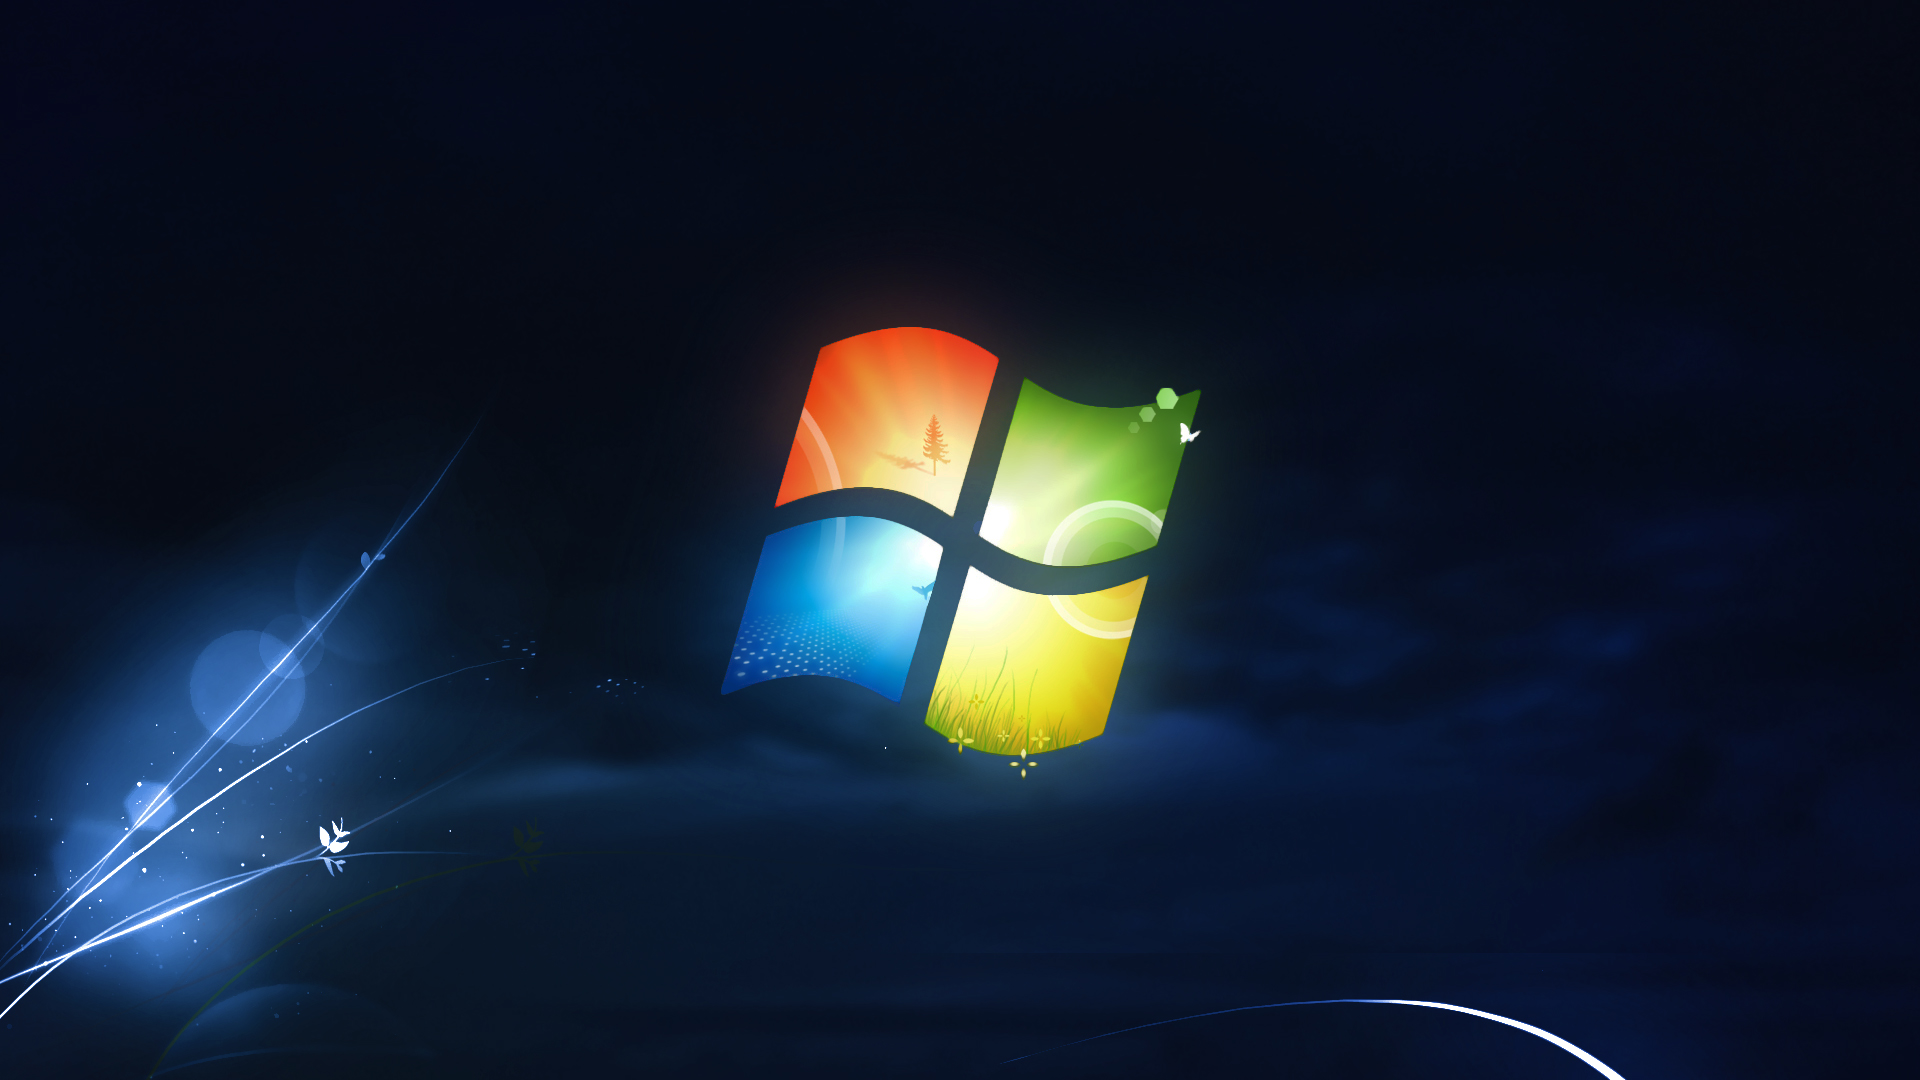 Microsoft Backgrounds Download HD Wallpapers 1920x1080